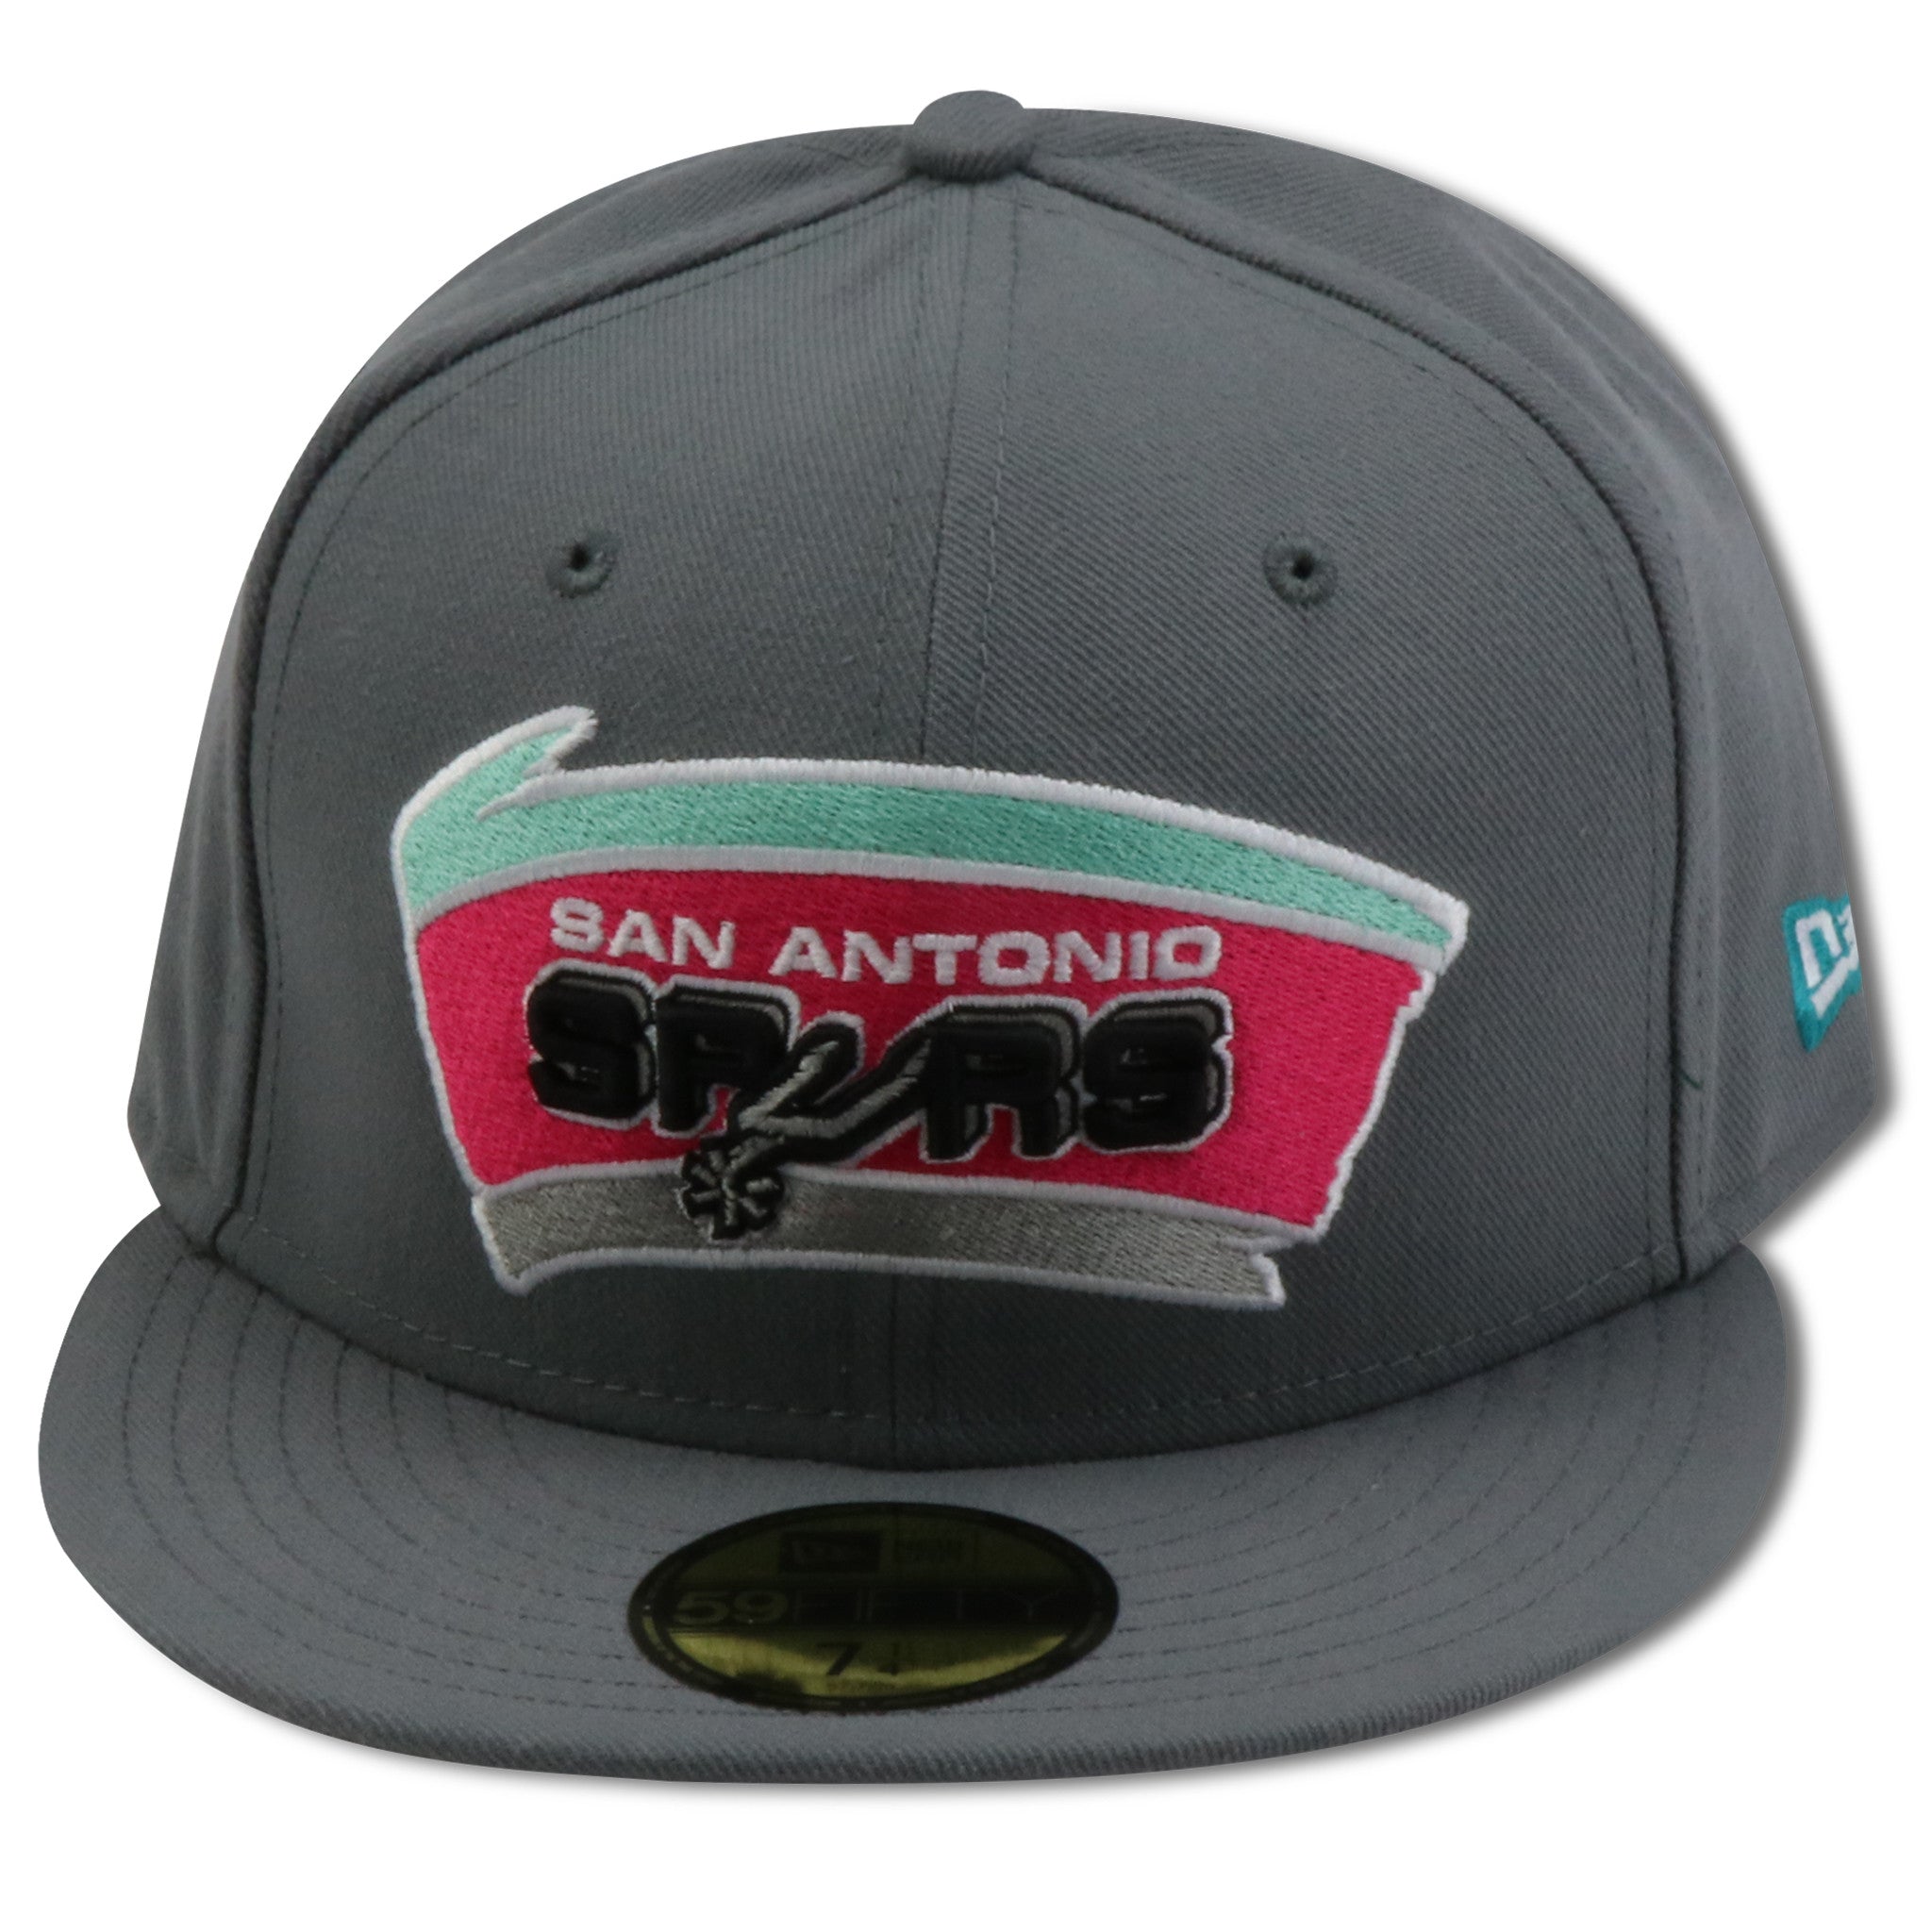 SAN ANTONIO SPURS NEW ERA 59FIFTY FITTED